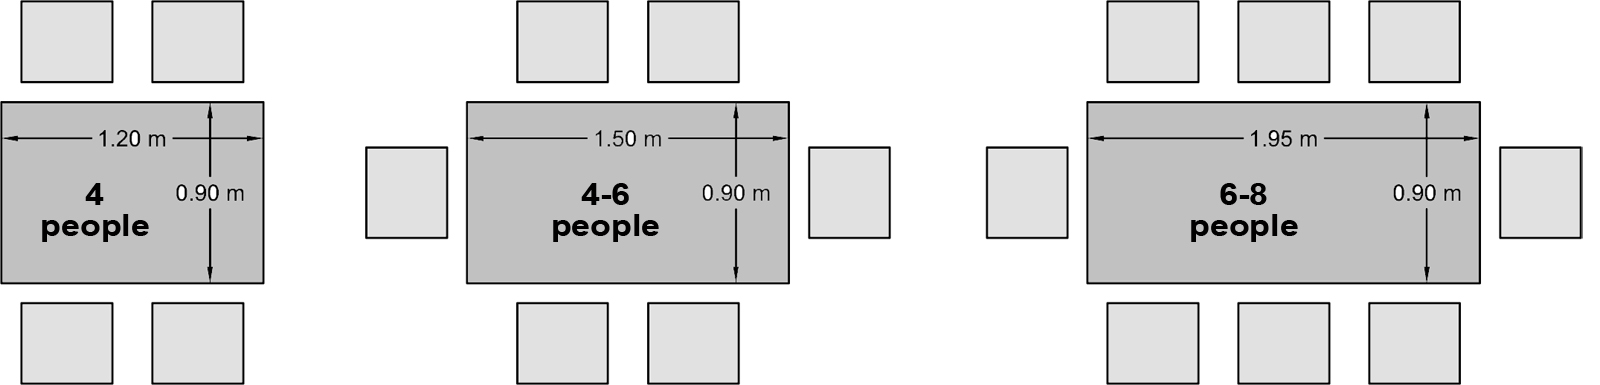 Average Size Of A 6 Seater Dining Table, What Is The Average Length And Width Of A Dining Room Table